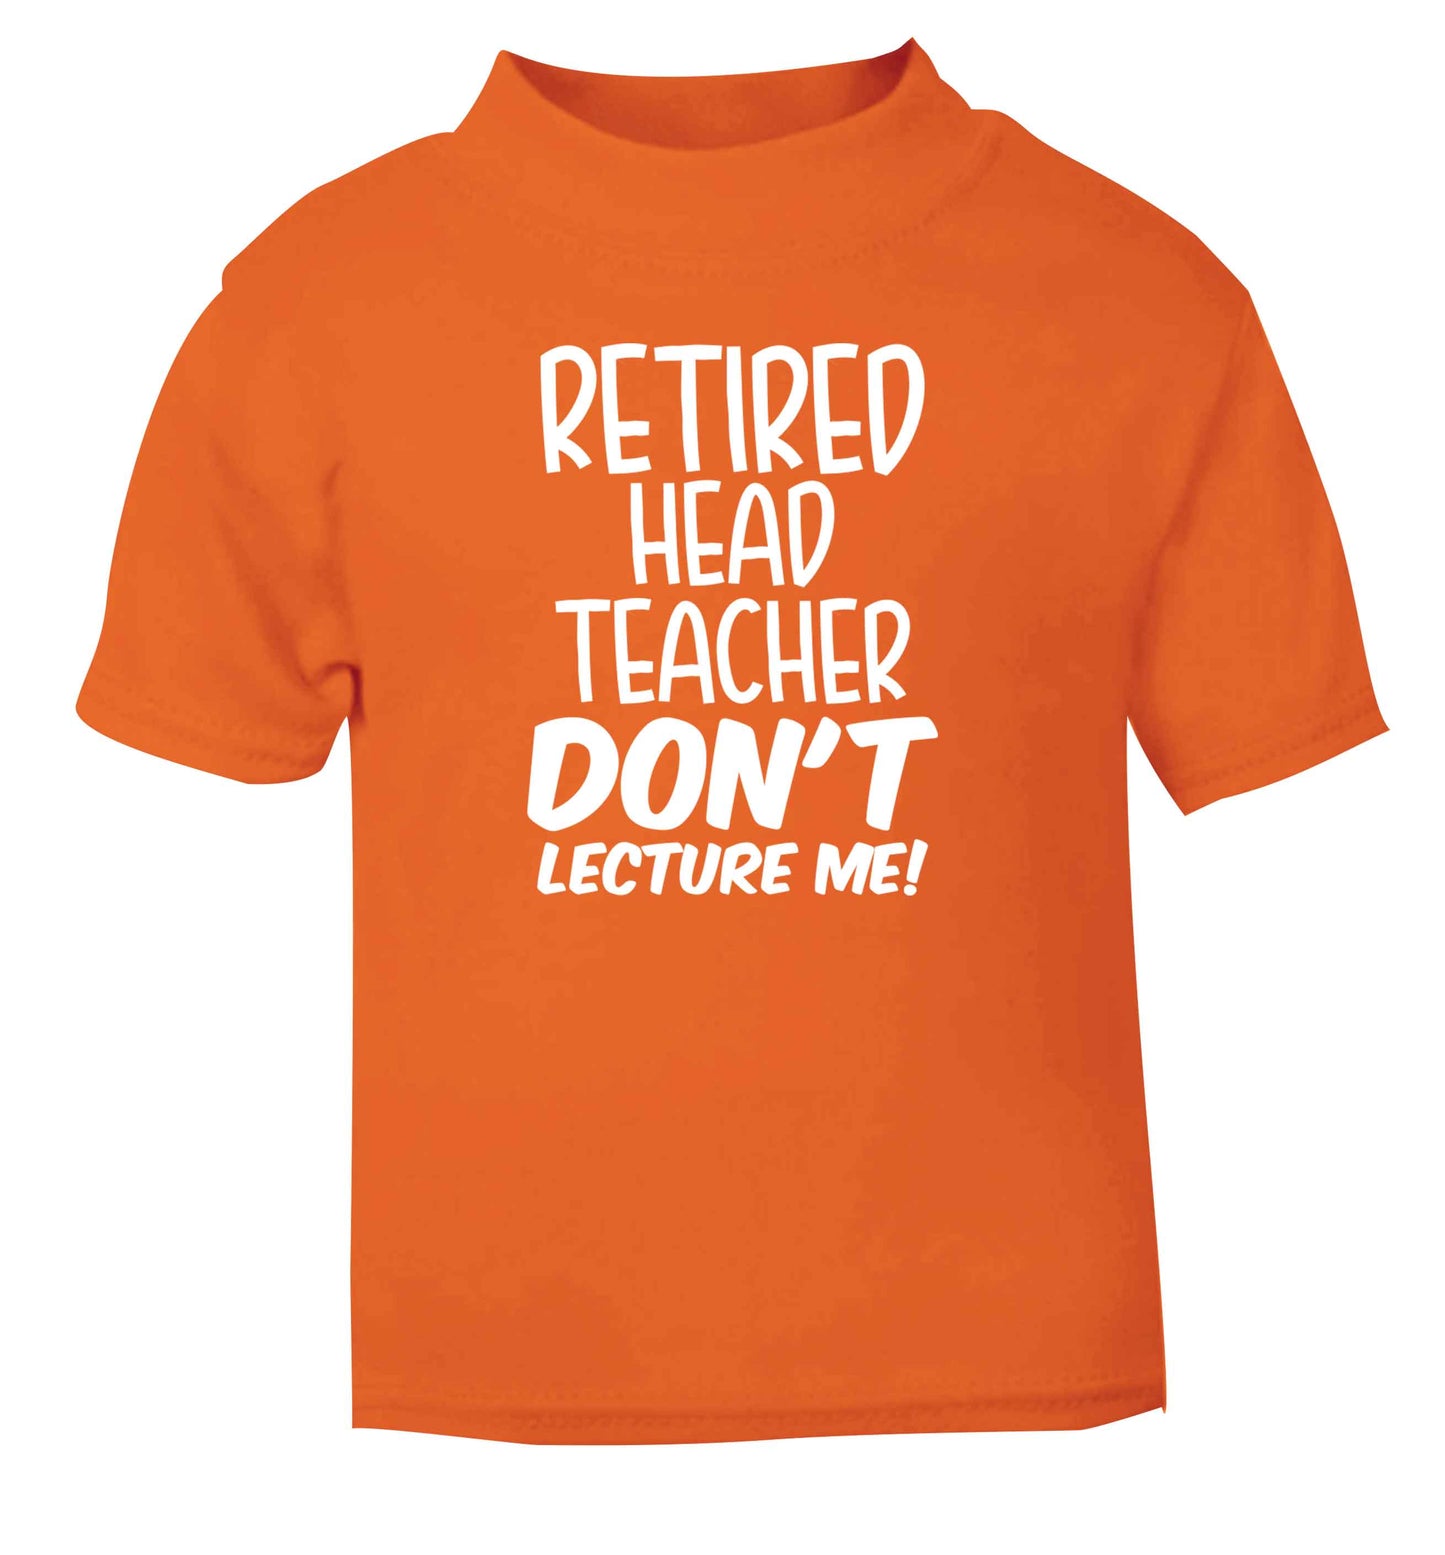 Retired head teacher don't lecture me! orange Baby Toddler Tshirt 2 Years